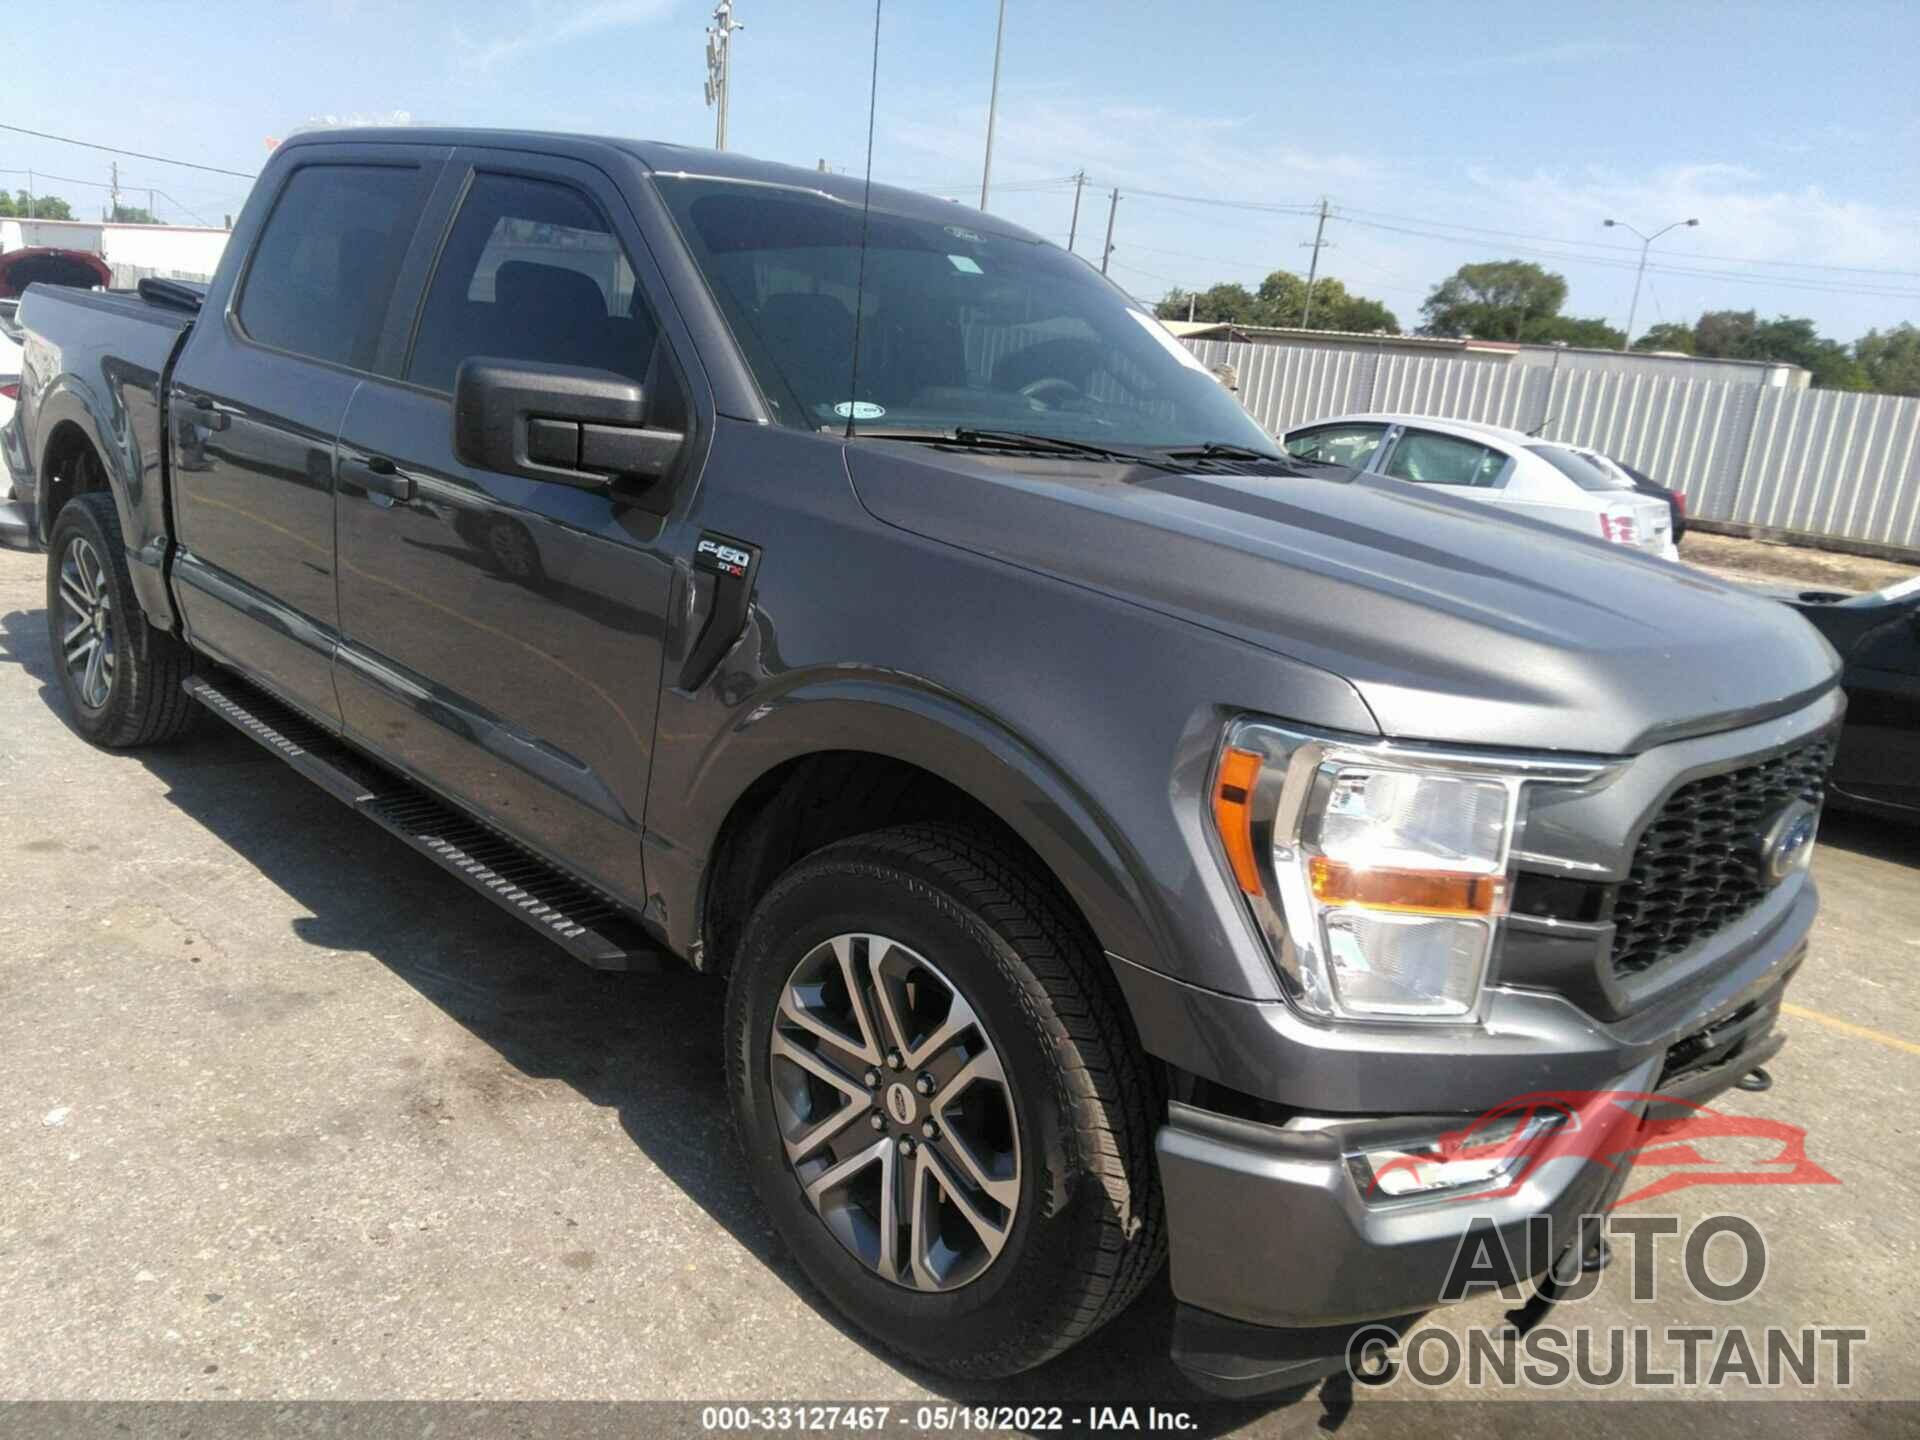 2021 F-150 FORD